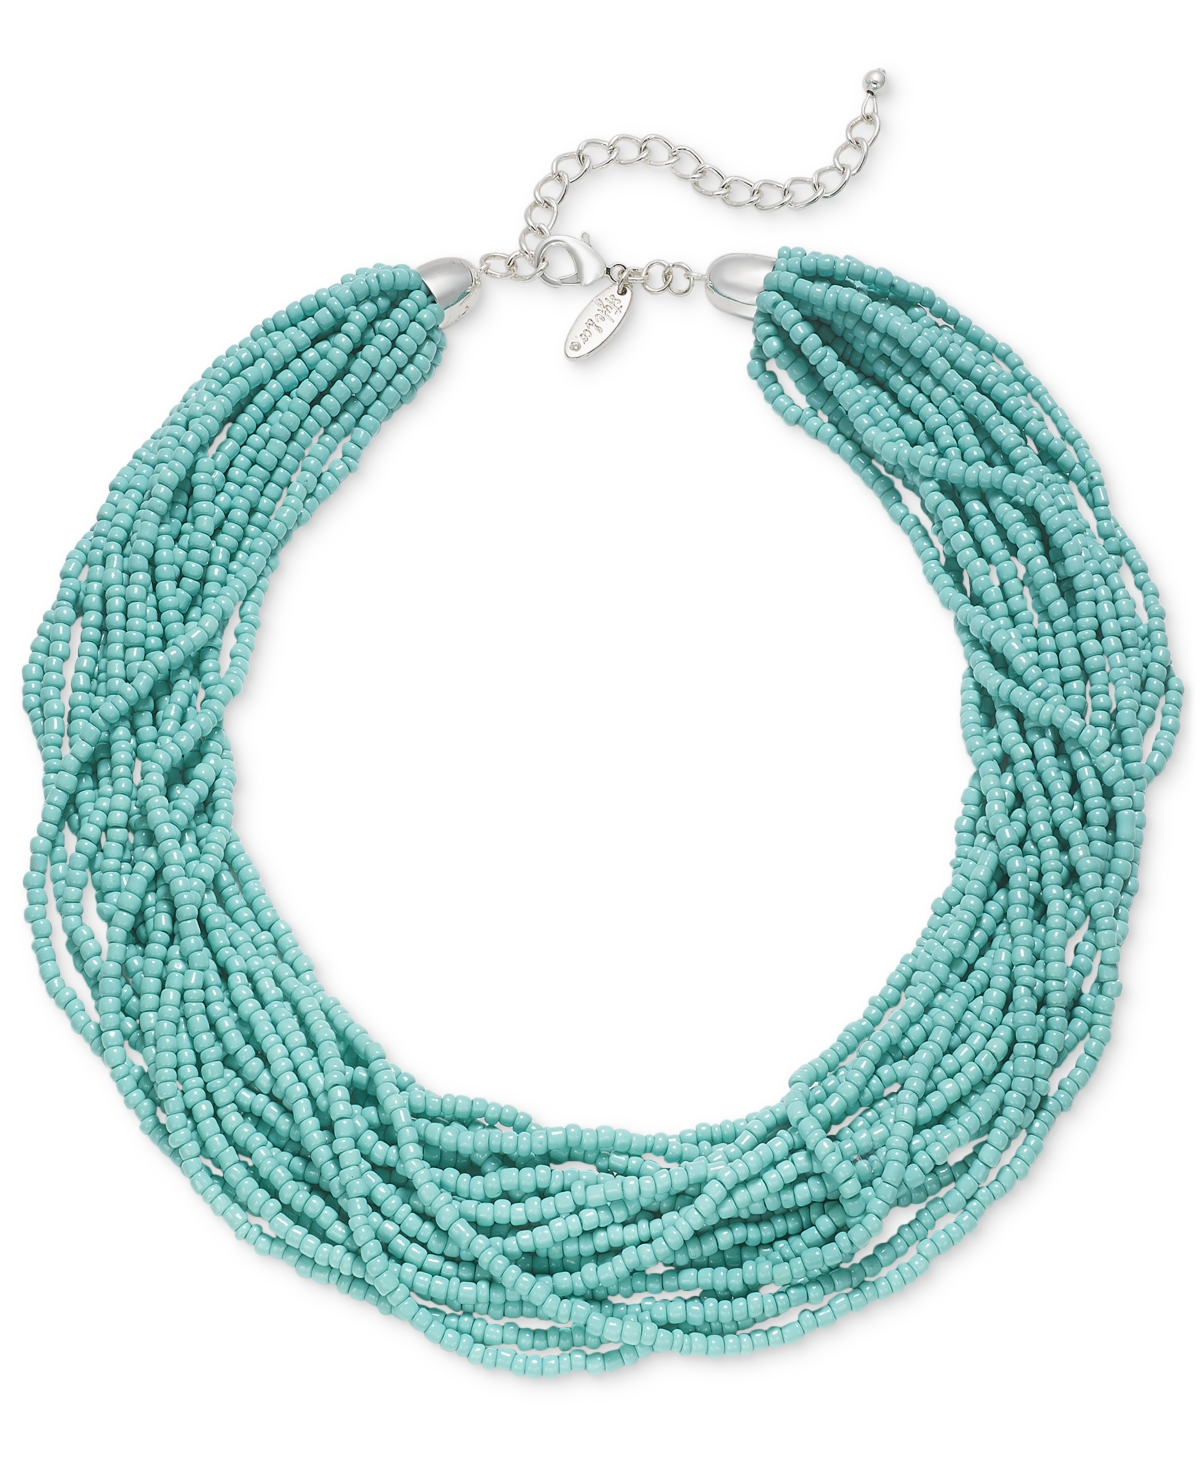 Color Seed Bead Torsade Statement Necklace, 18" + 2" extender, Created for Macy's - Coral